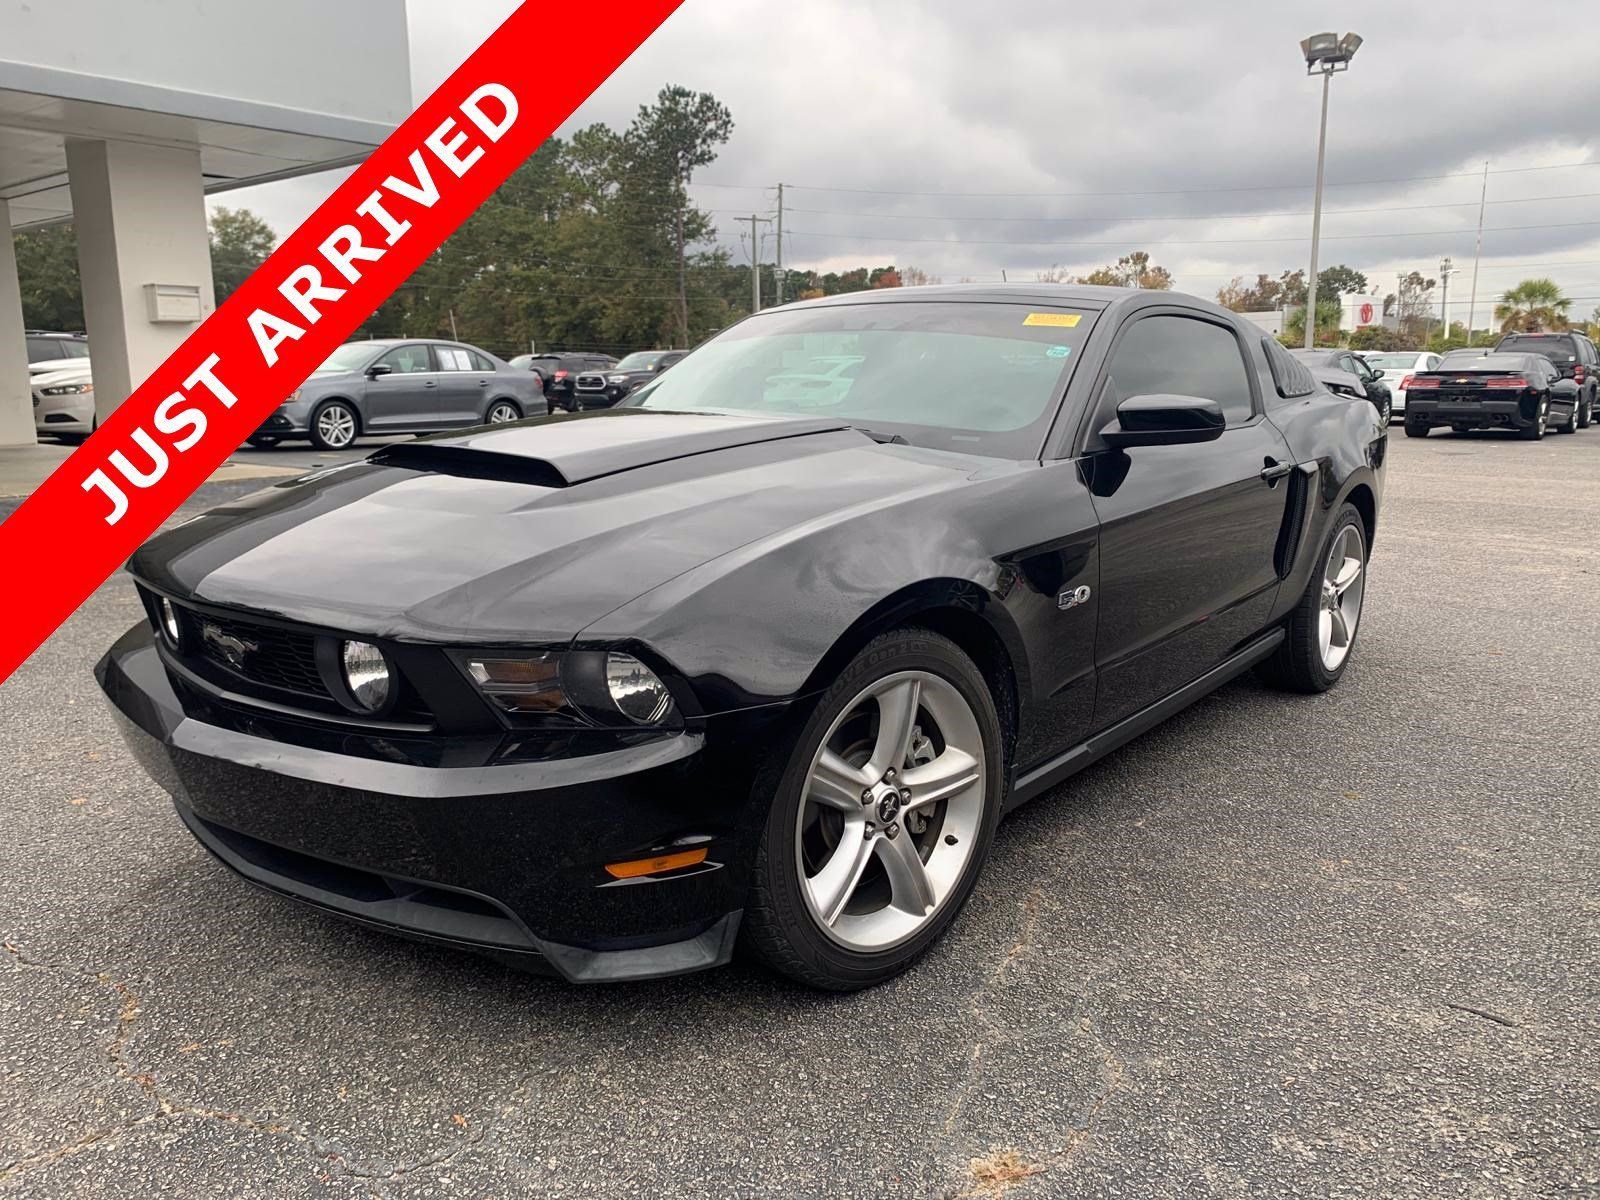 Used 2012 Ford Mustang